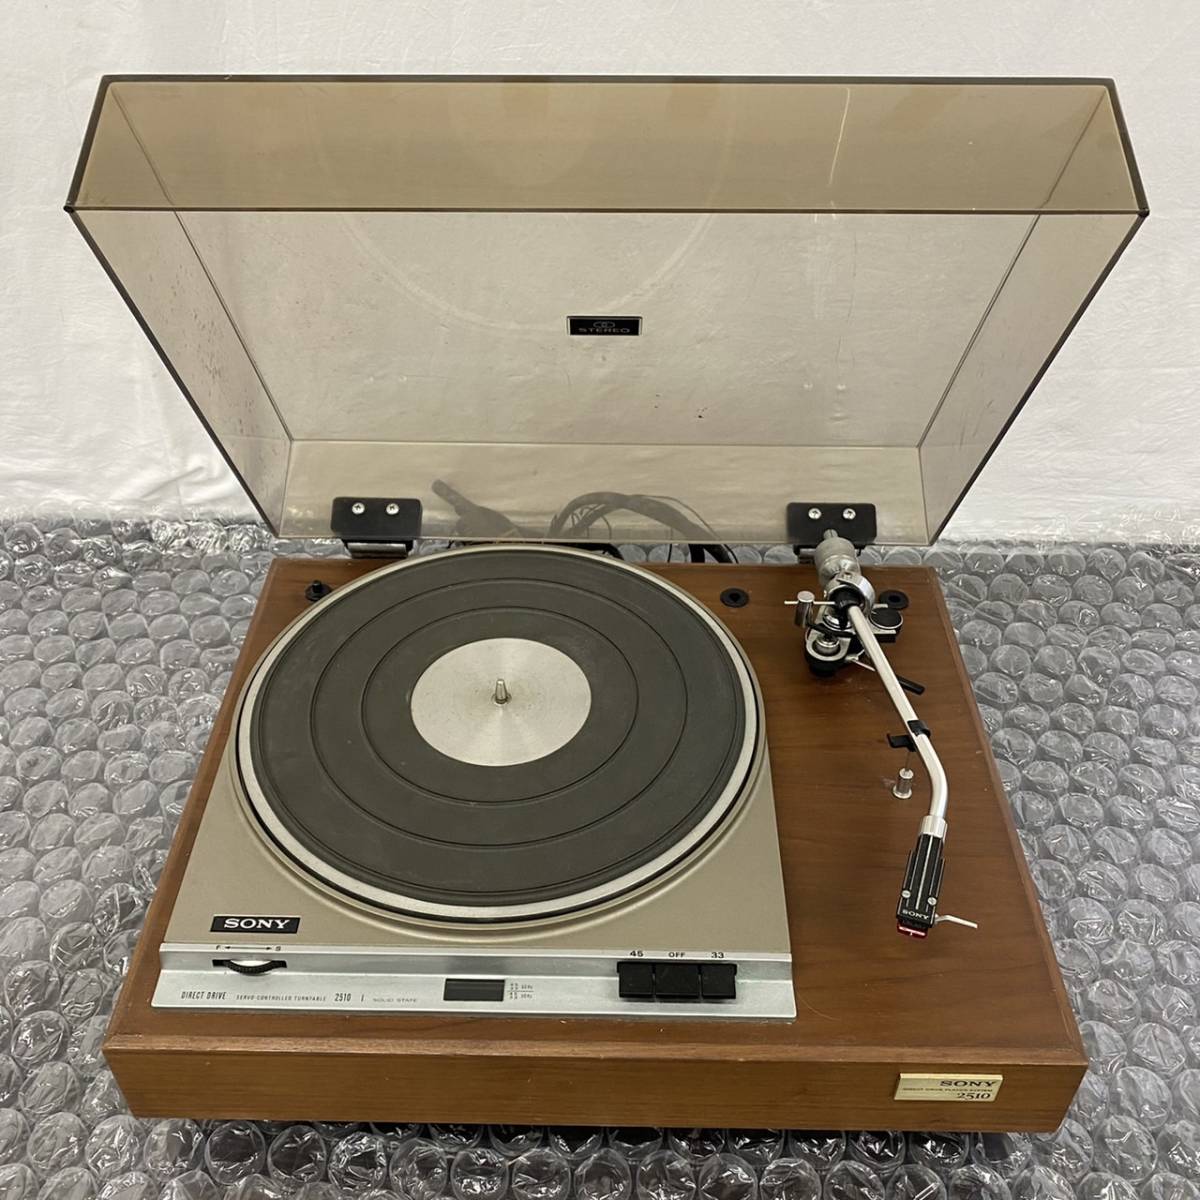 W14293(072)-512/KD3000【名古屋】ソニー SONY ステレオレコードプレイヤーシステム STEREO RECORD PLAYER SYSTEM PS-2510_画像4